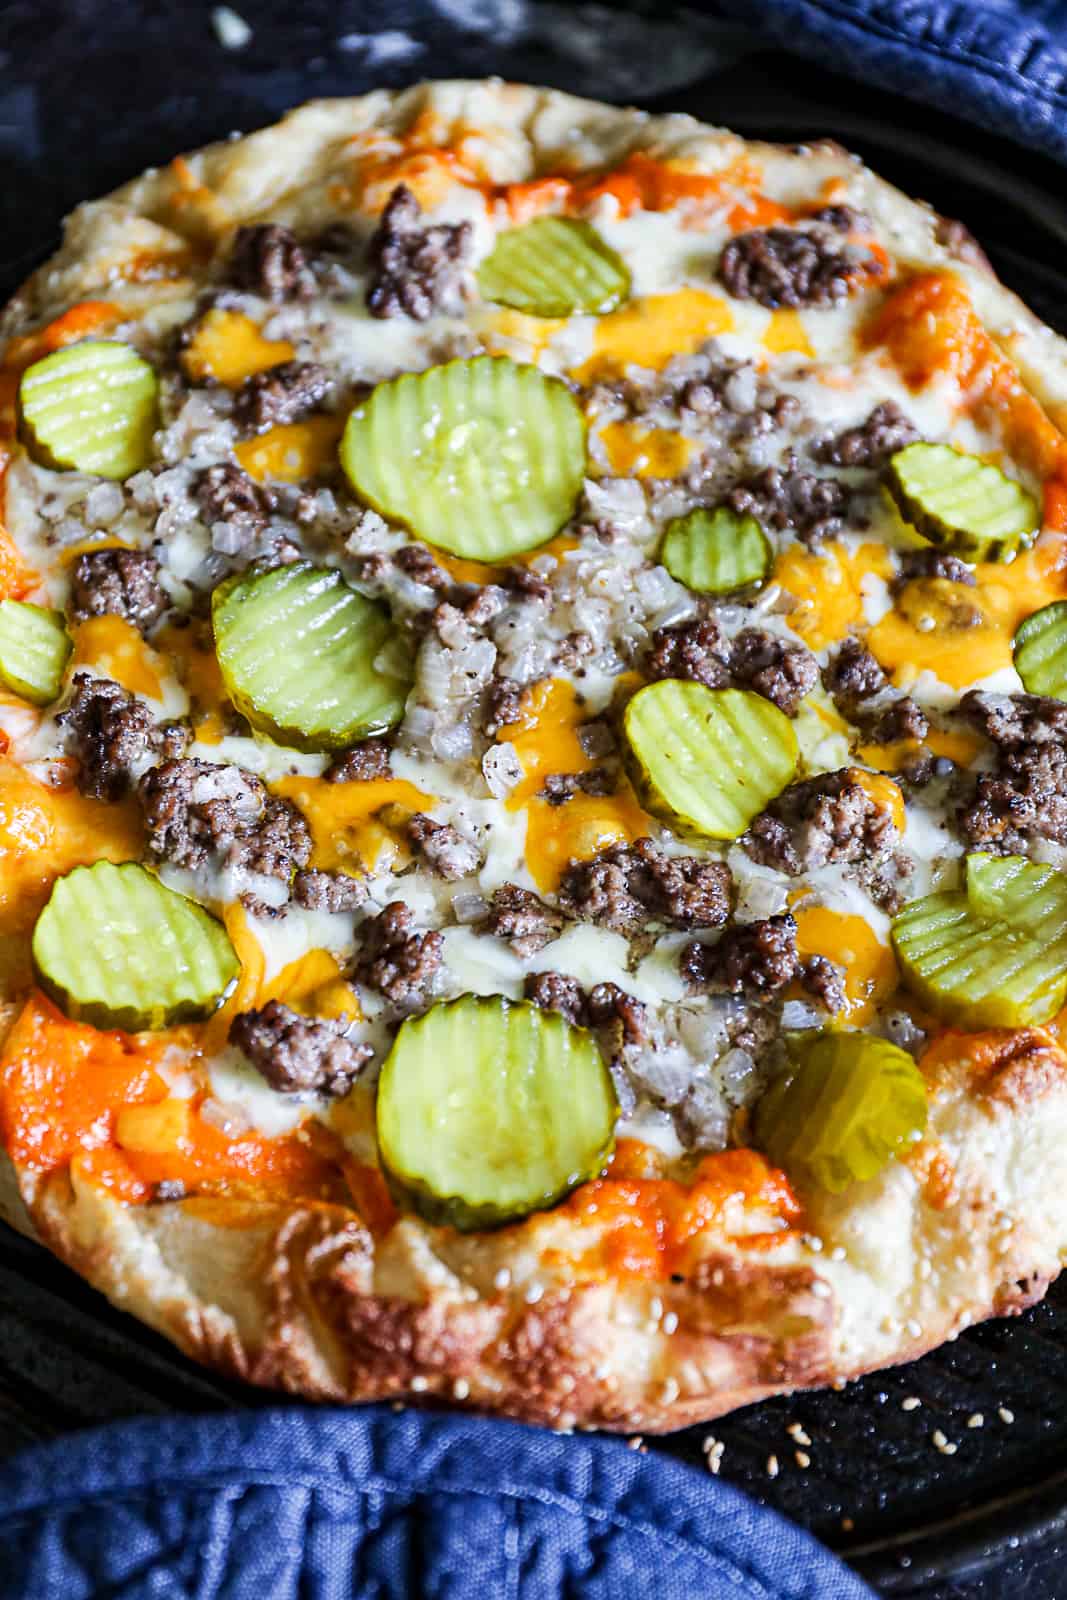 Closeup of Pizza with pickles, cheeseburger meat, and sesame seeds